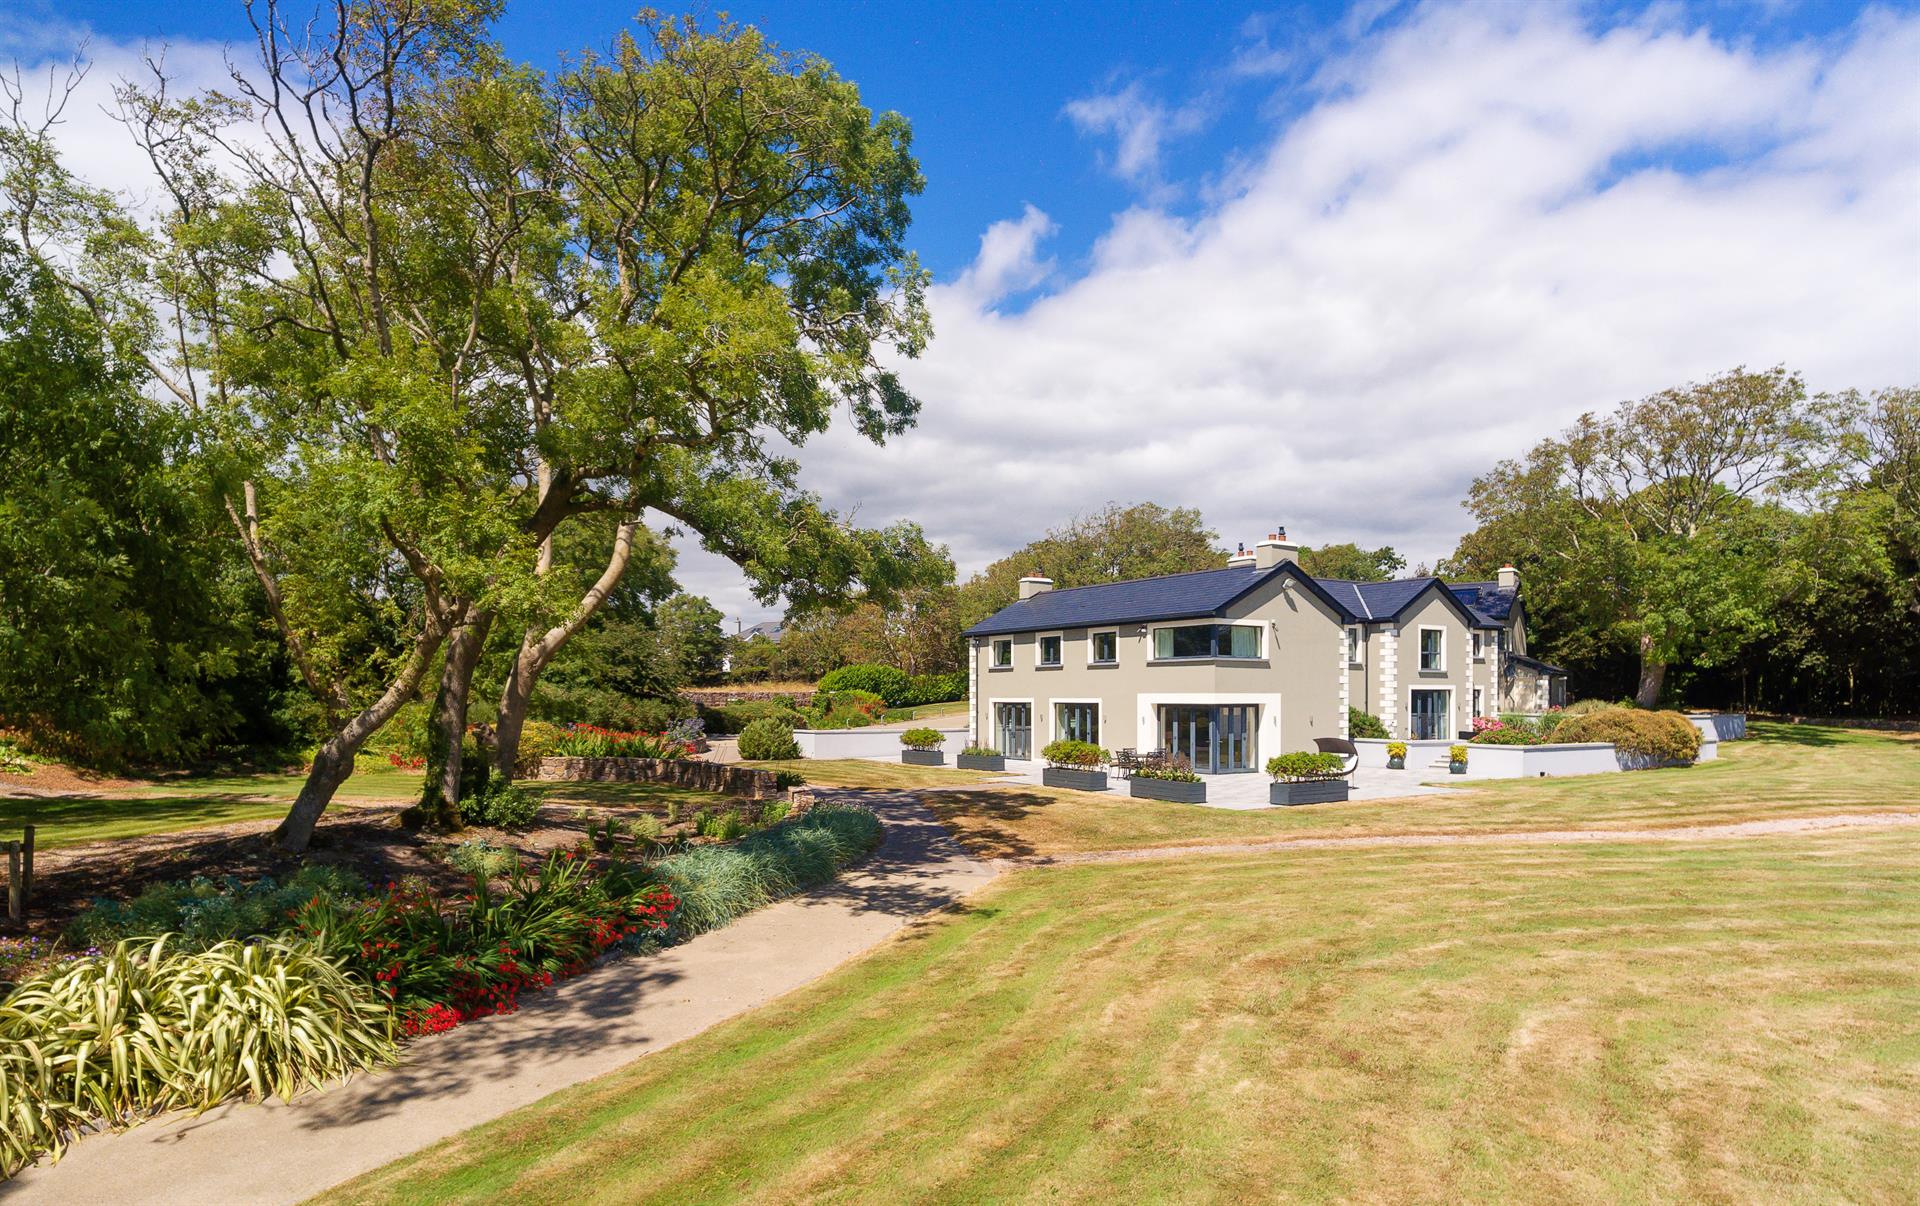 Lough Rusheen House, Barna Road, Galway City, County Galway: a luxury ...